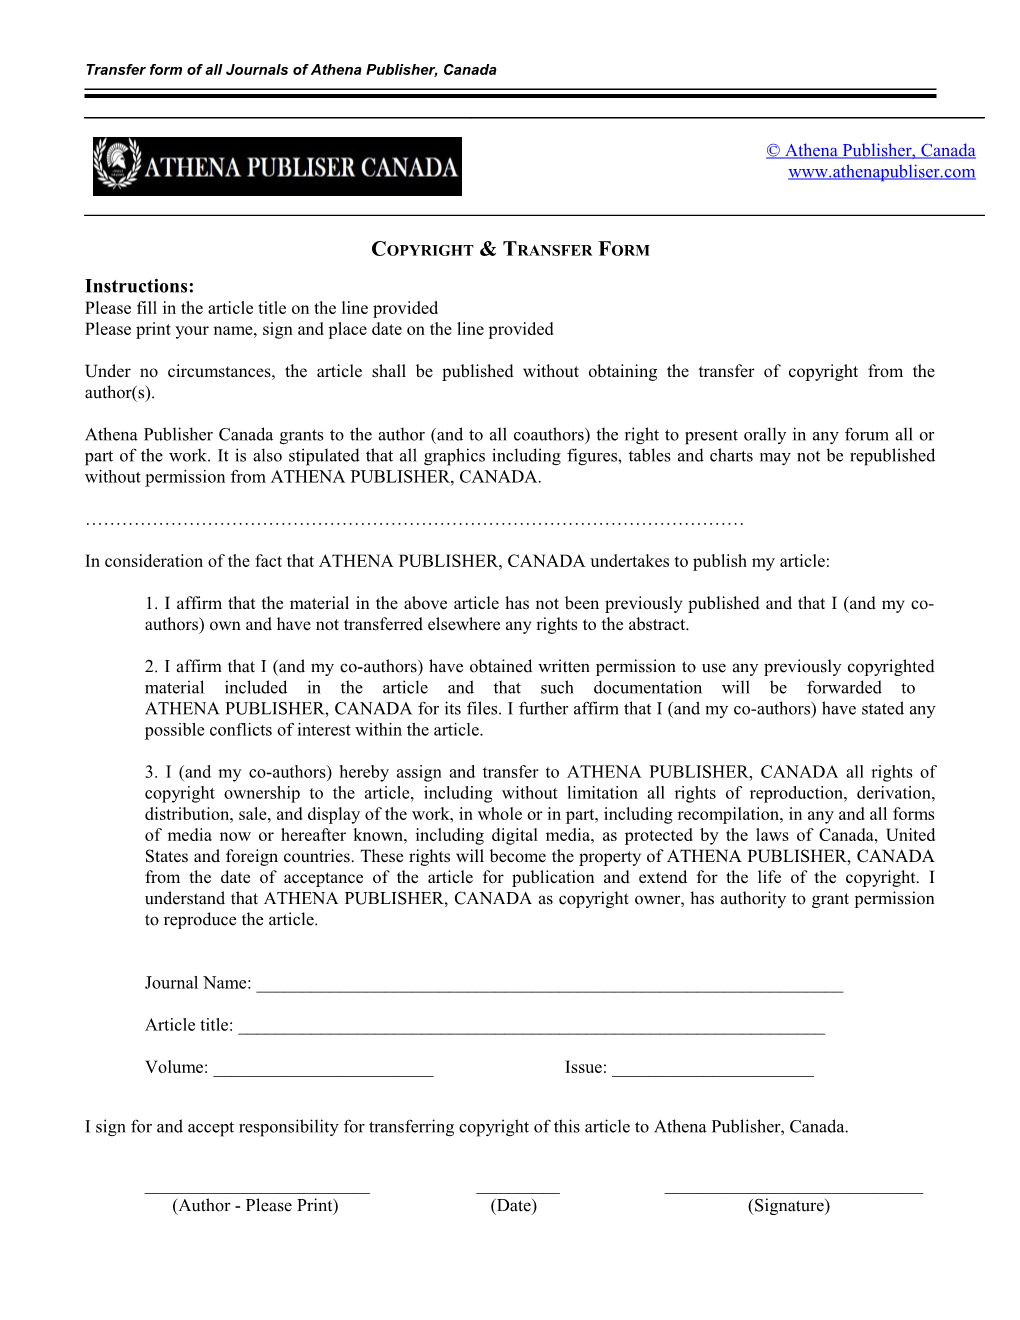 Transfer Form of All Journals of Athena Publisher, Canada